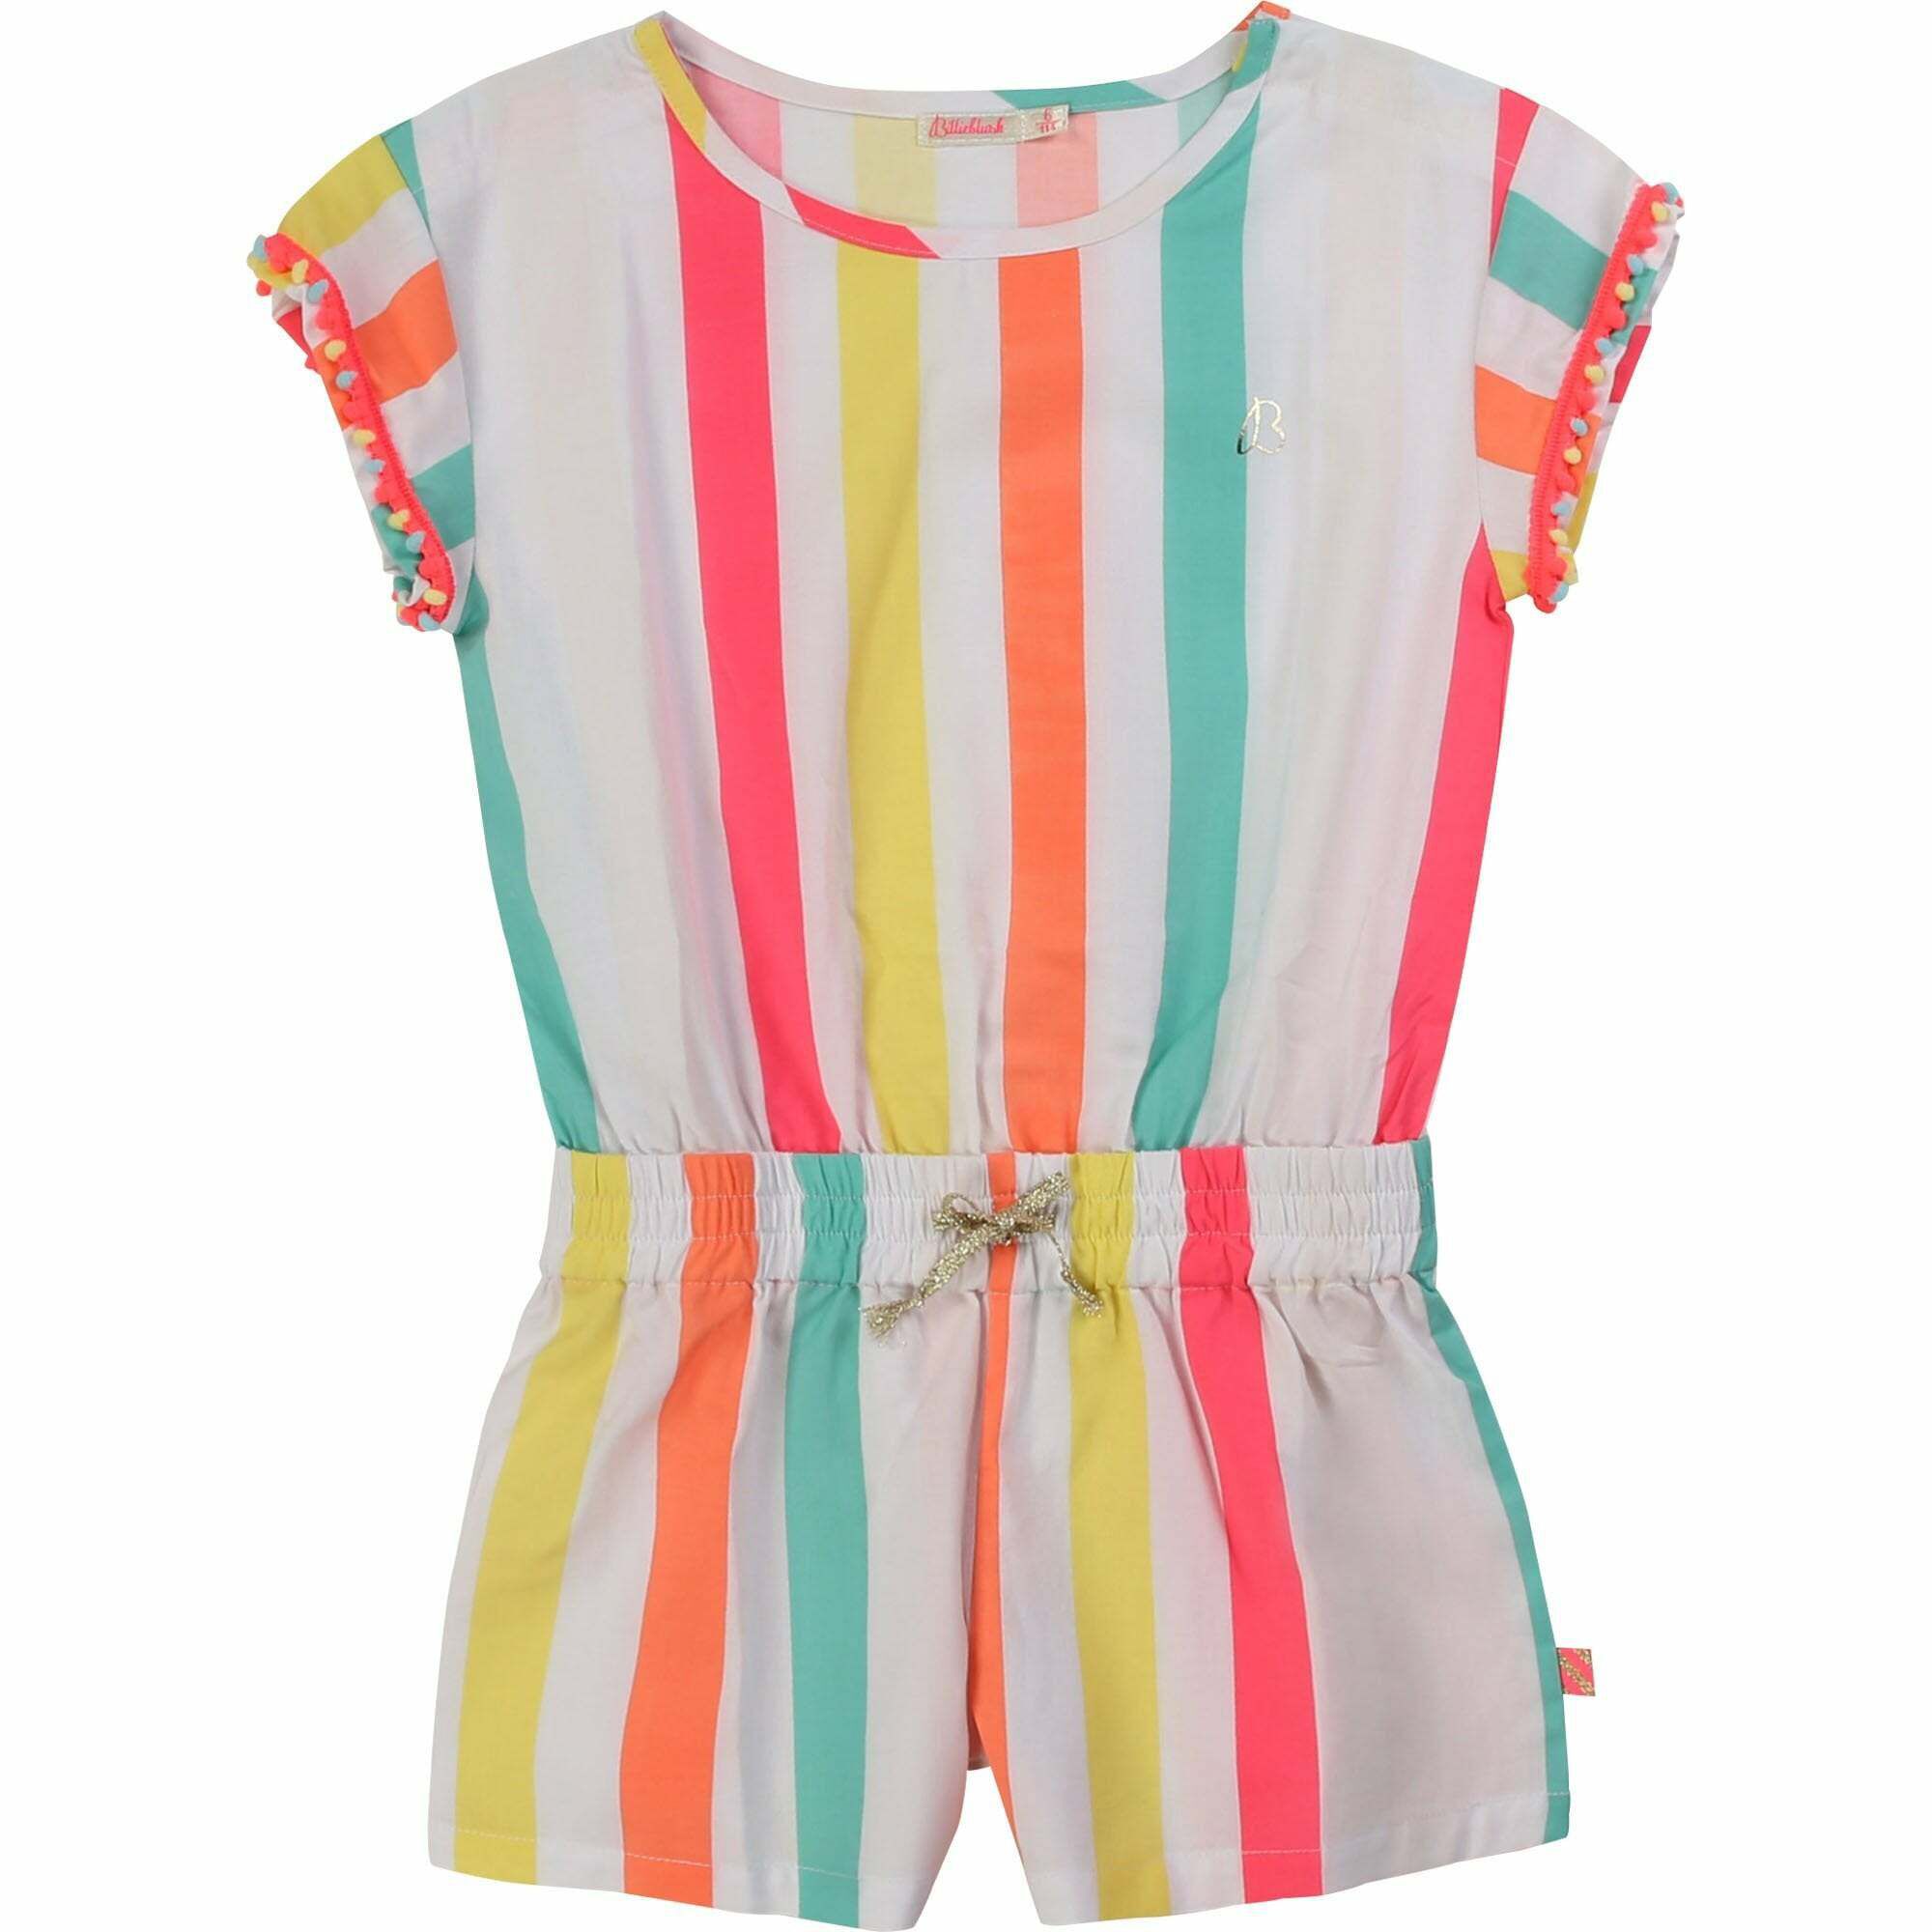 Designer BILLIEBLUSH Baby Girls All in on Play Suit WAS £36 NOW £18 SALE SALE 